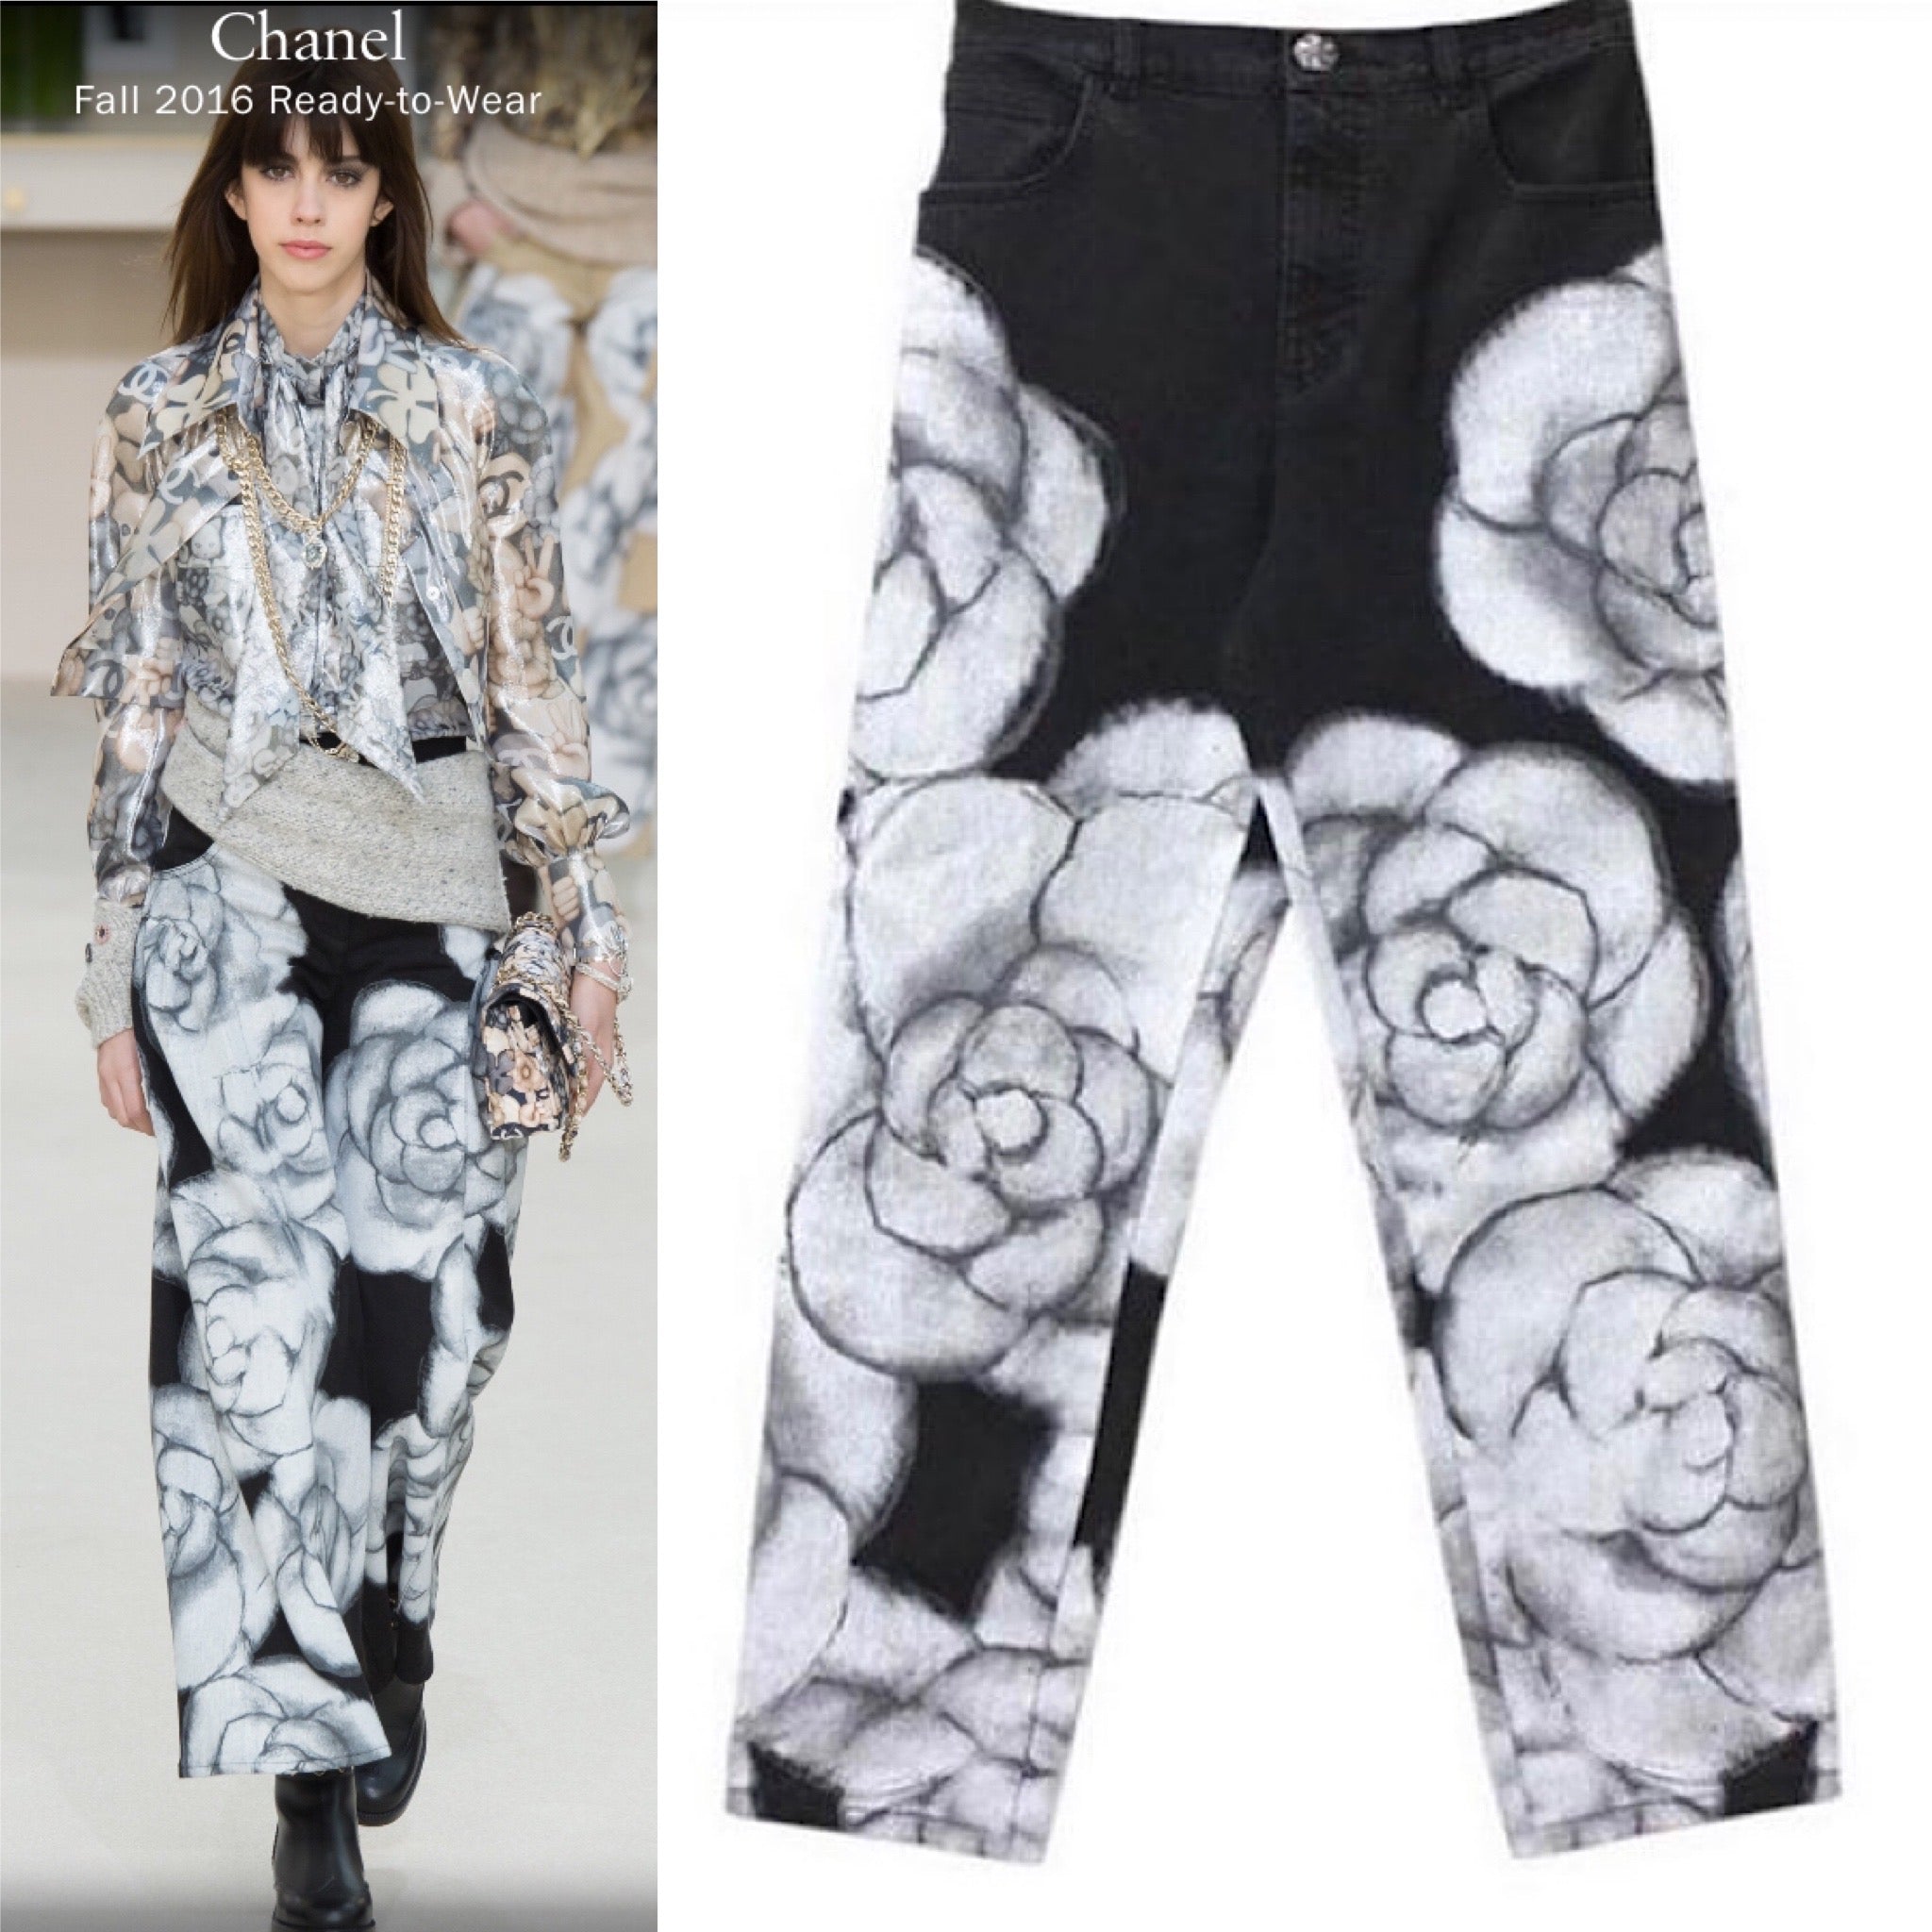 HelensChanel Nwt Chanel 2016 Fall Ready to Wear Runway Black White Camellia Painted Jeans FR 38 US 4